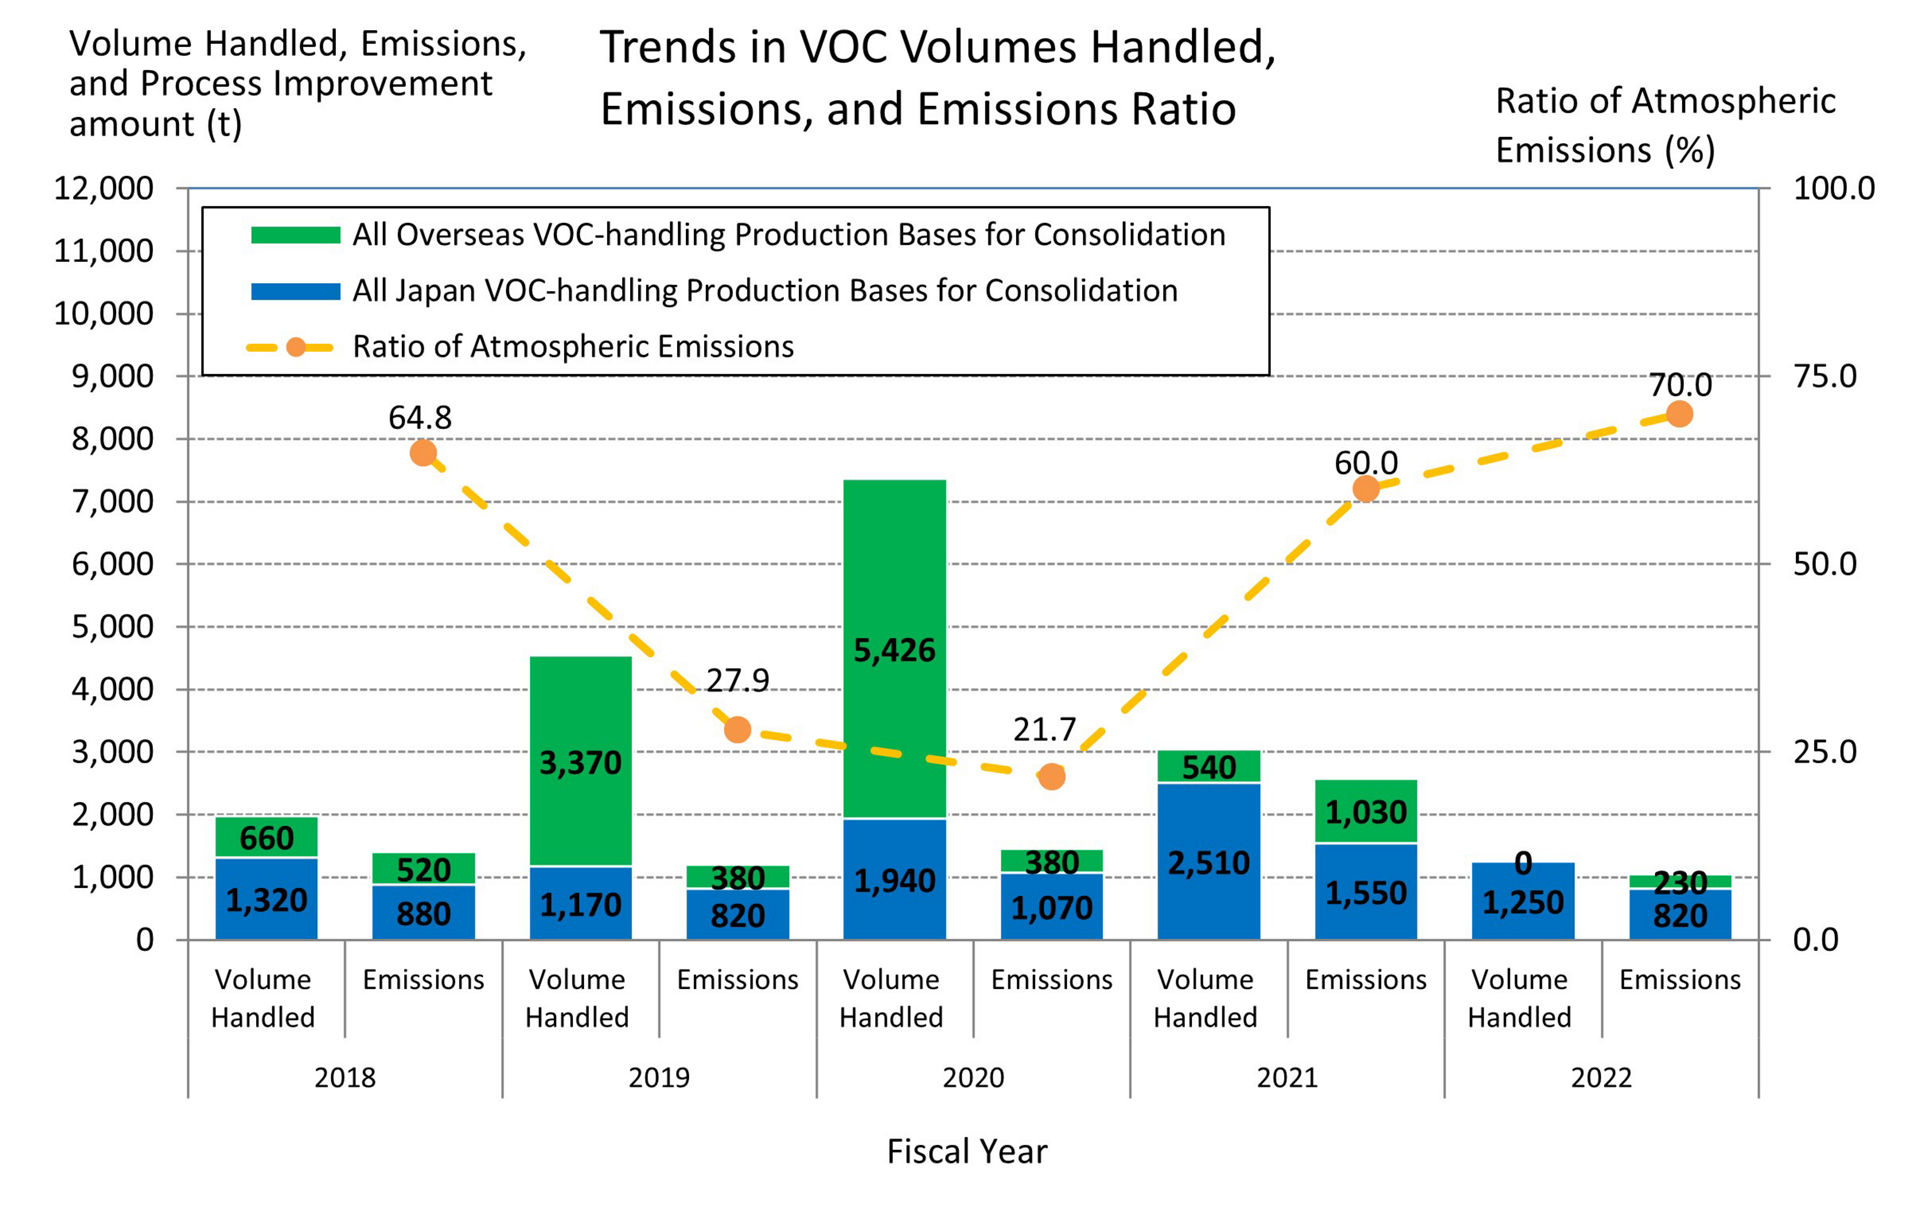 Trends in VOC Volumes Handled, Emissions, and Emissions Ratio